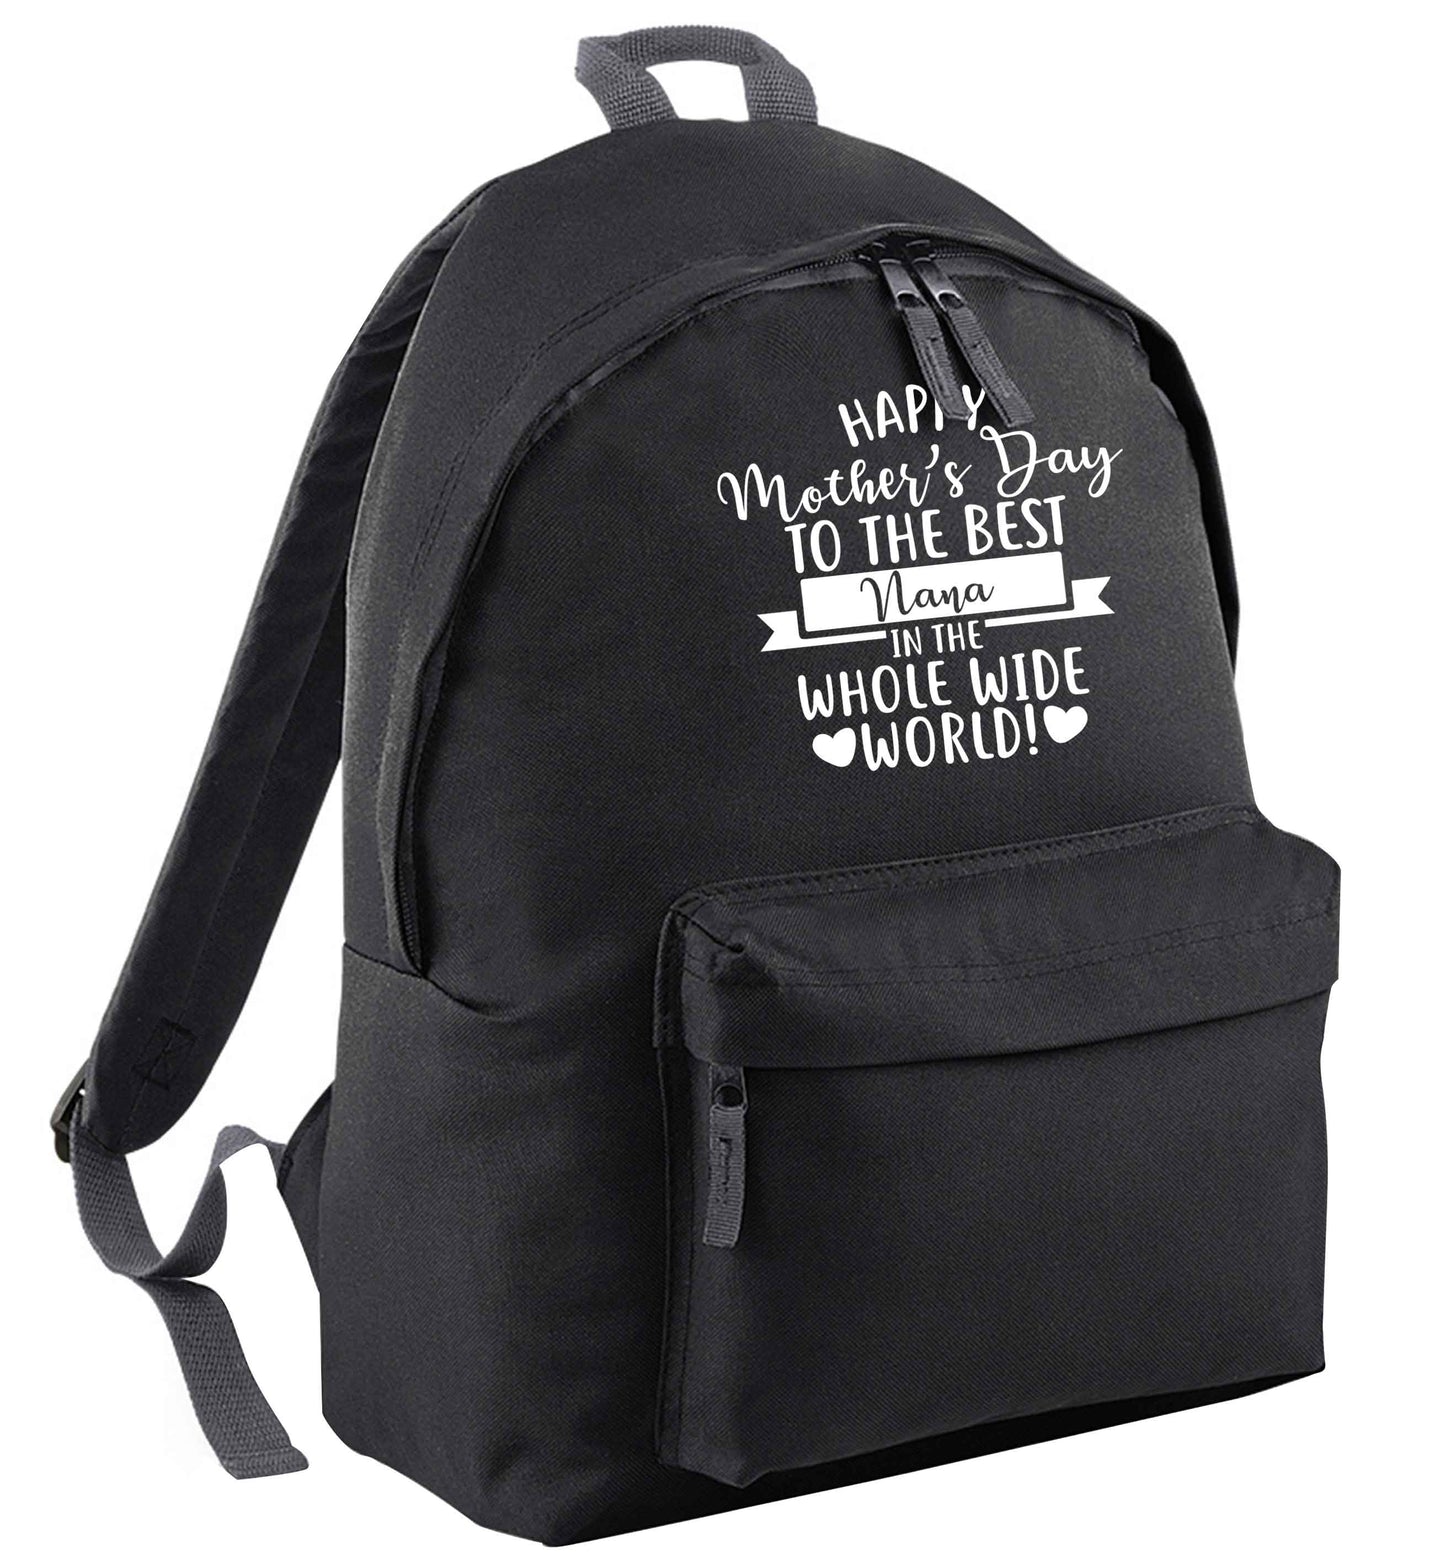 Happy mother's day to the best nana in the world | Children's backpack